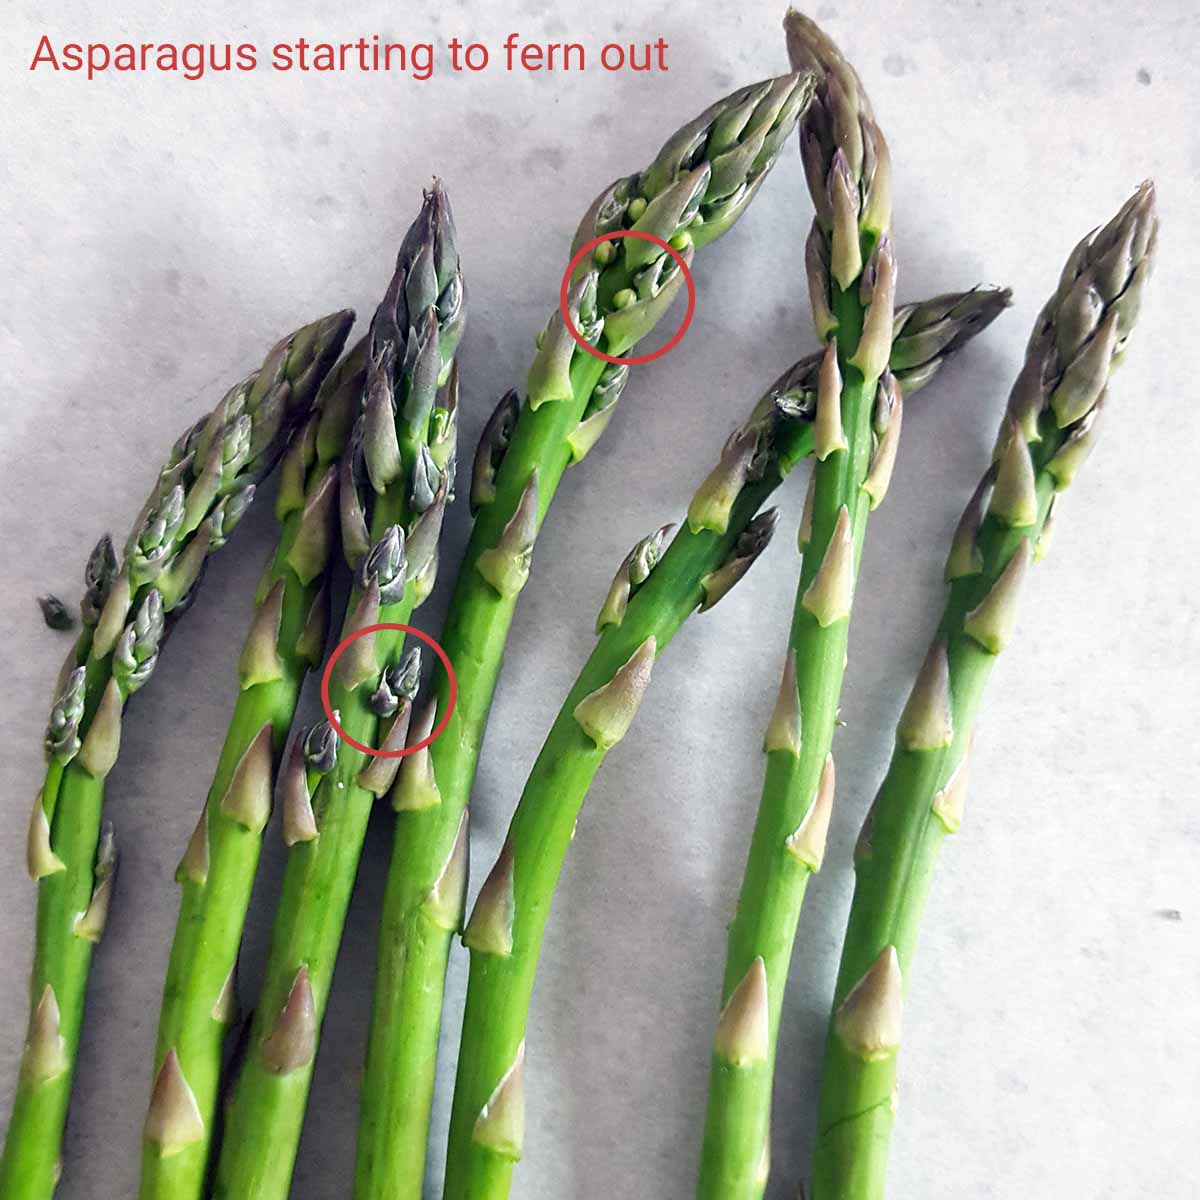 Asparagus that has started to fern out.